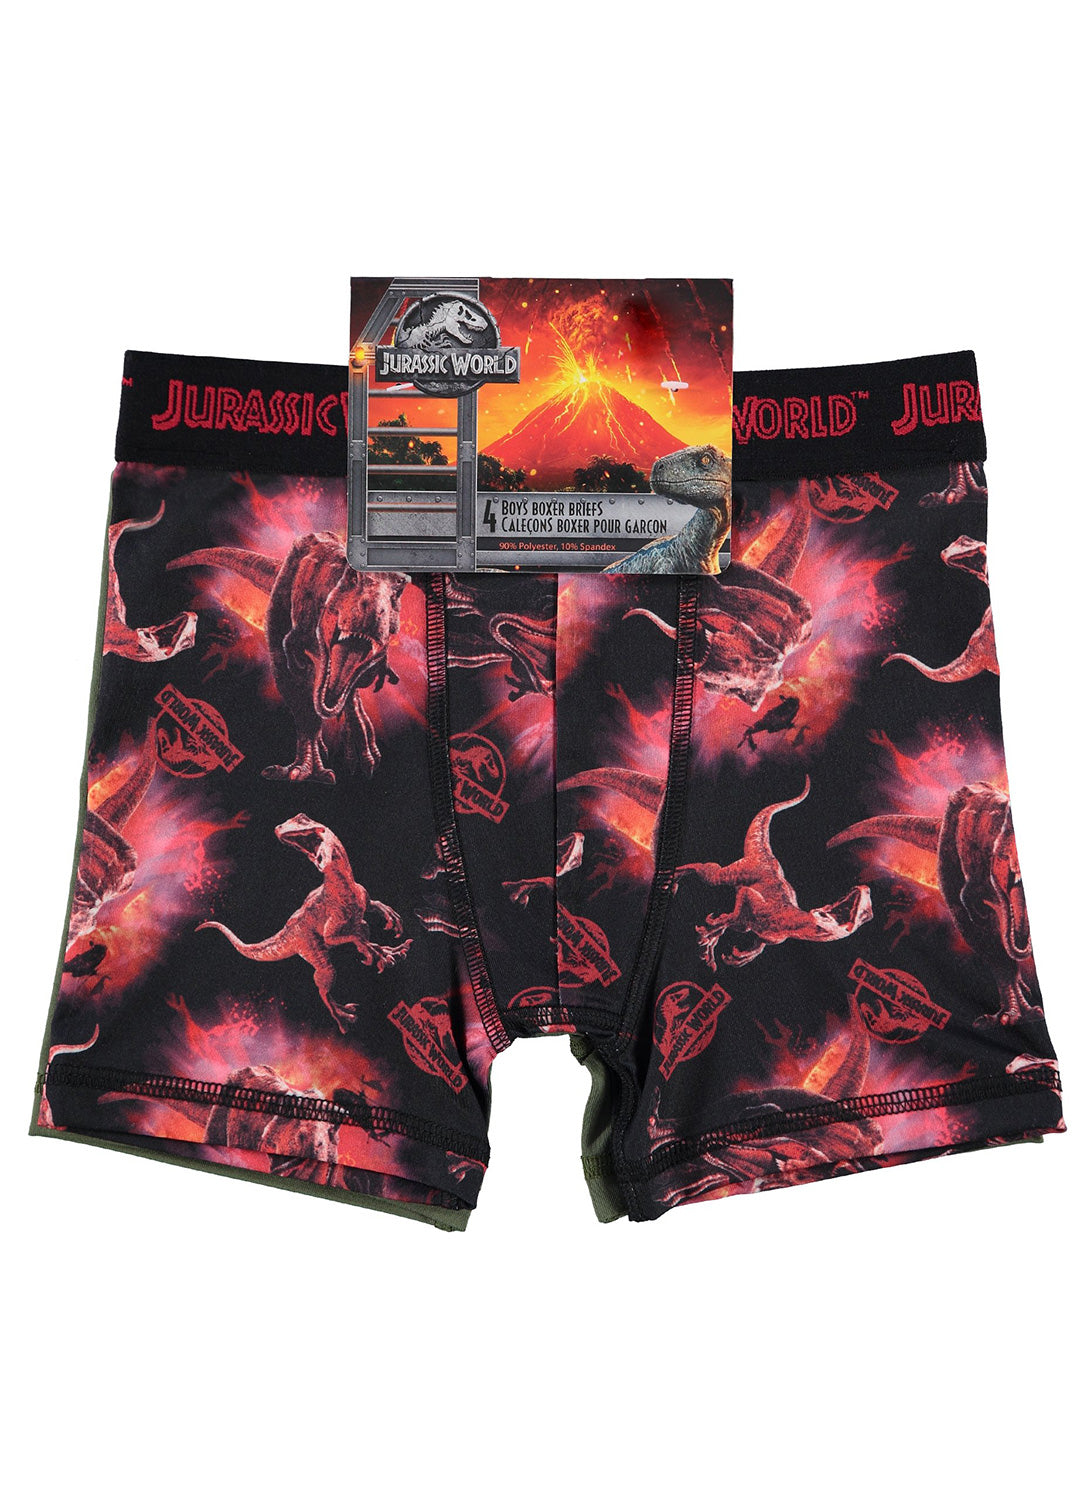 Package 4 Underwear for Boys with Jurassic World prints